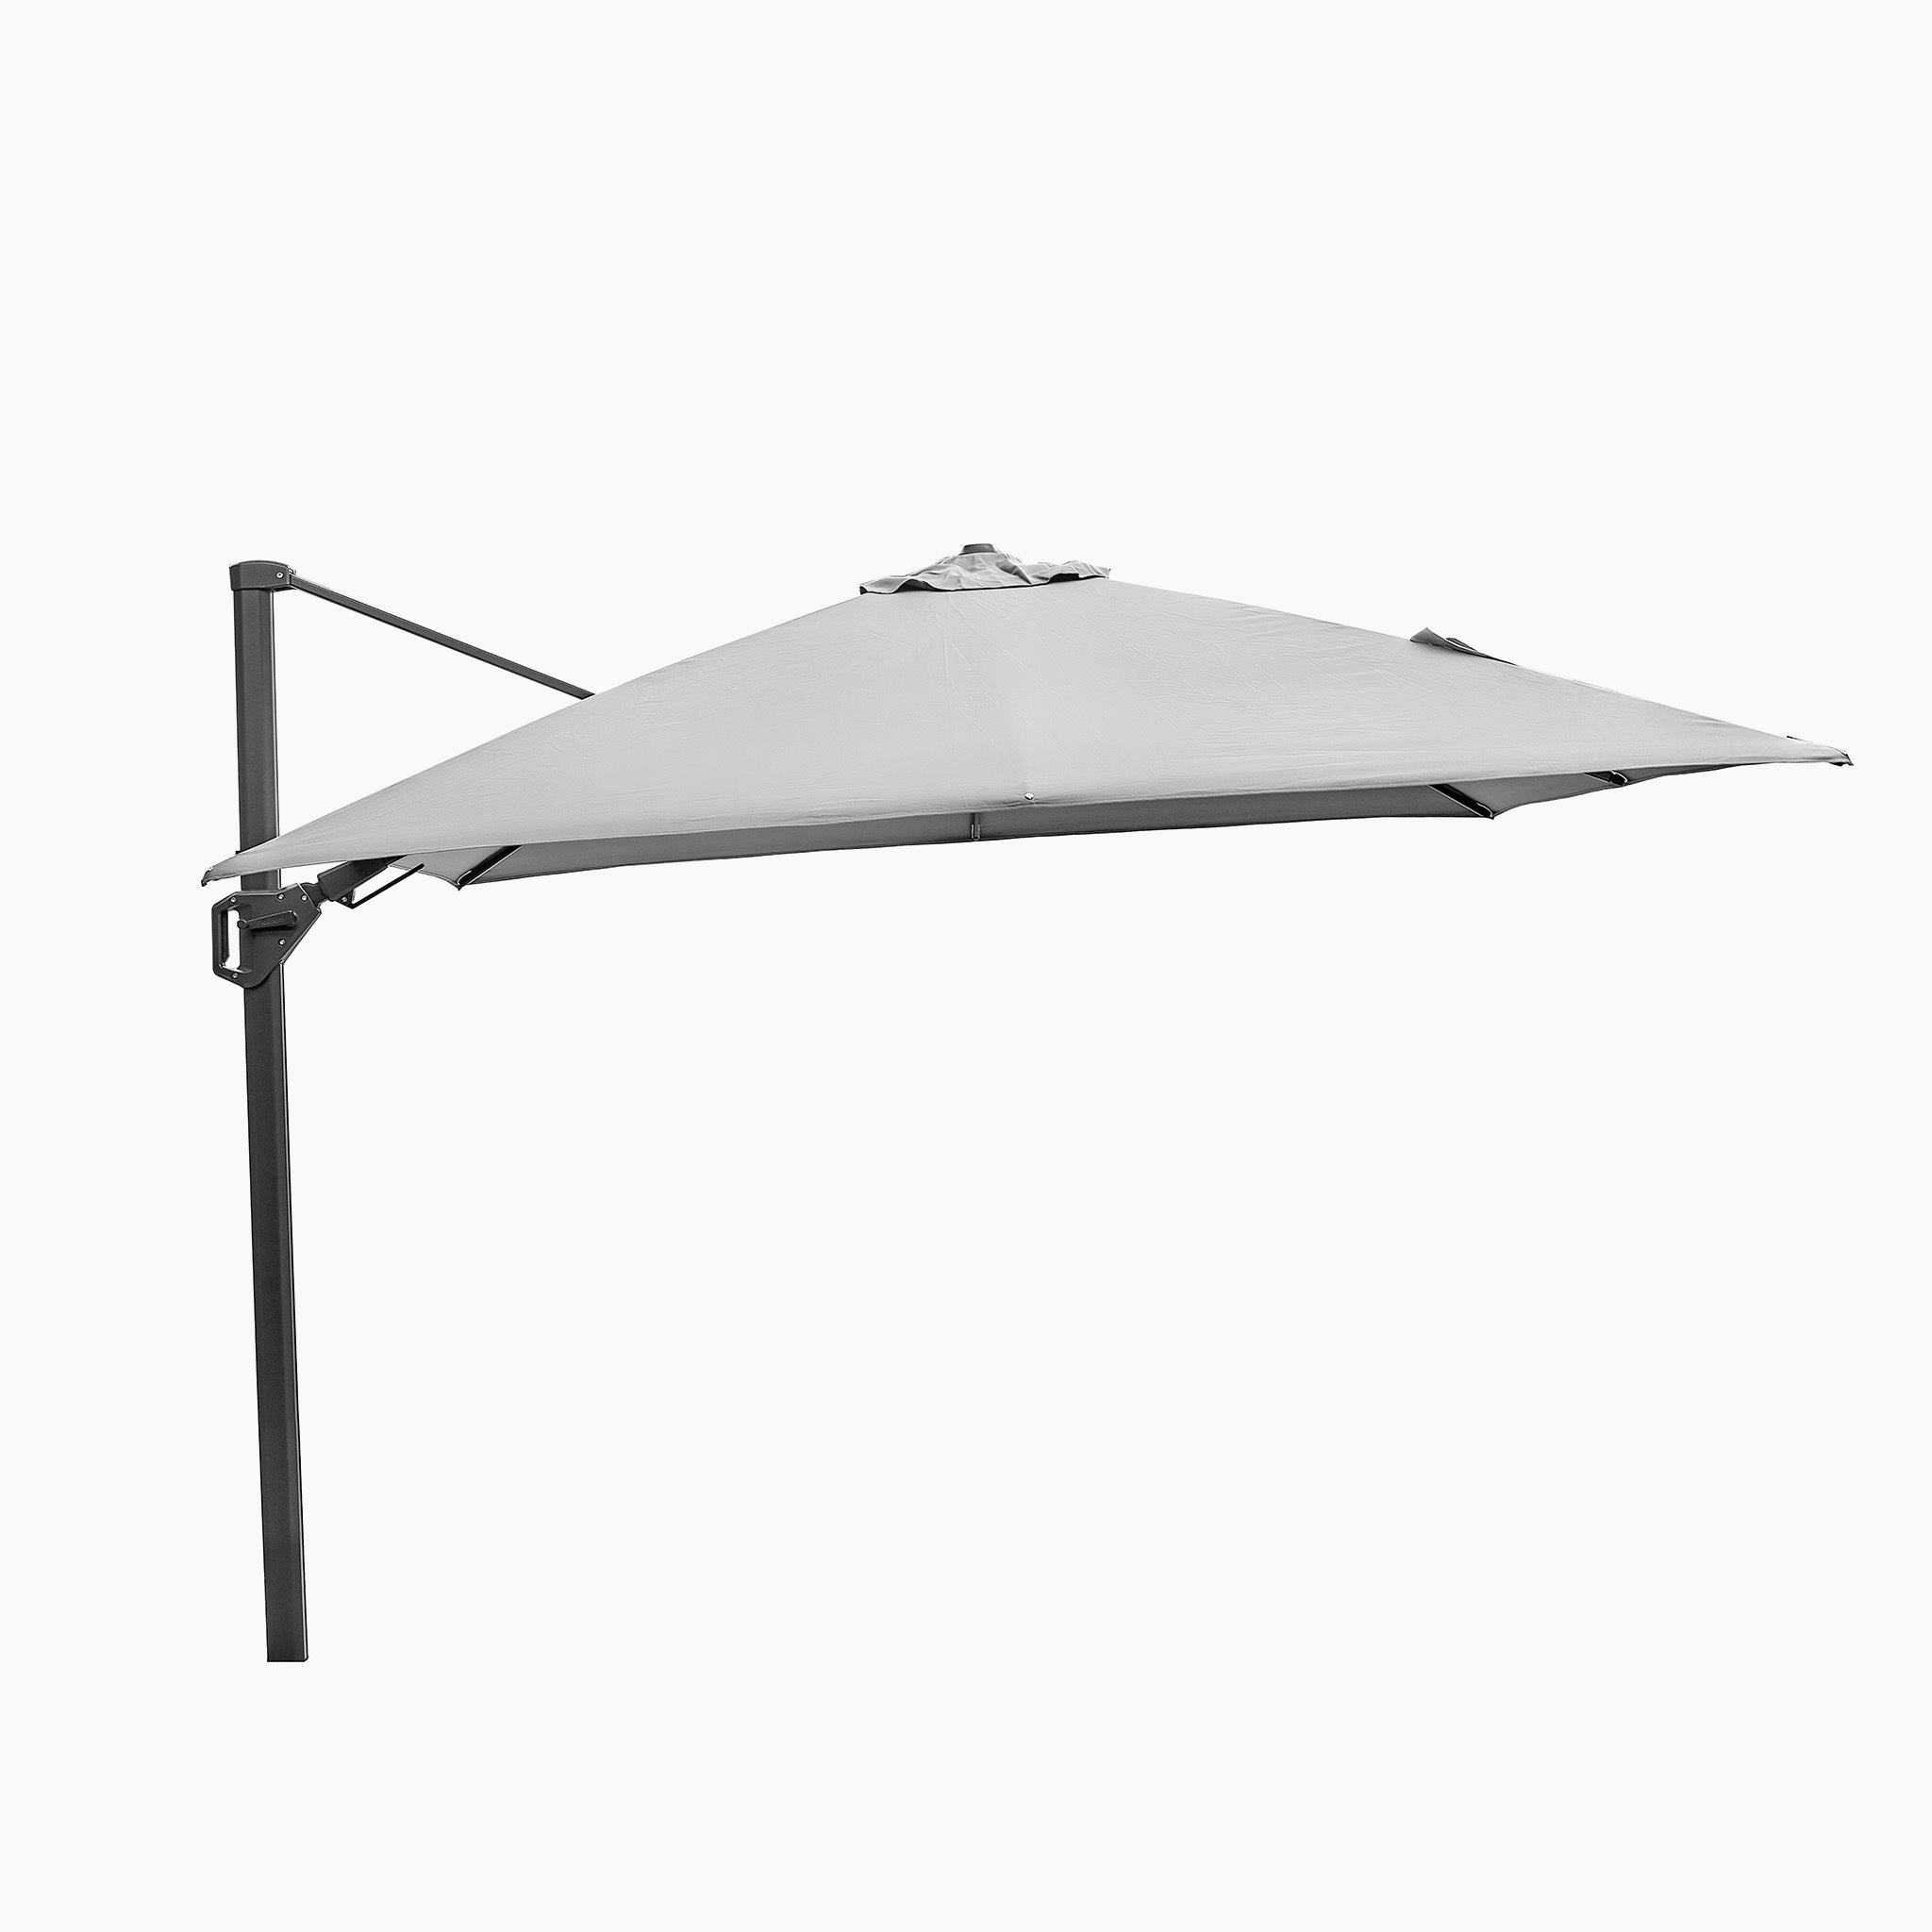 Challenger T2 3m Square Cantilever Parasol in Grey